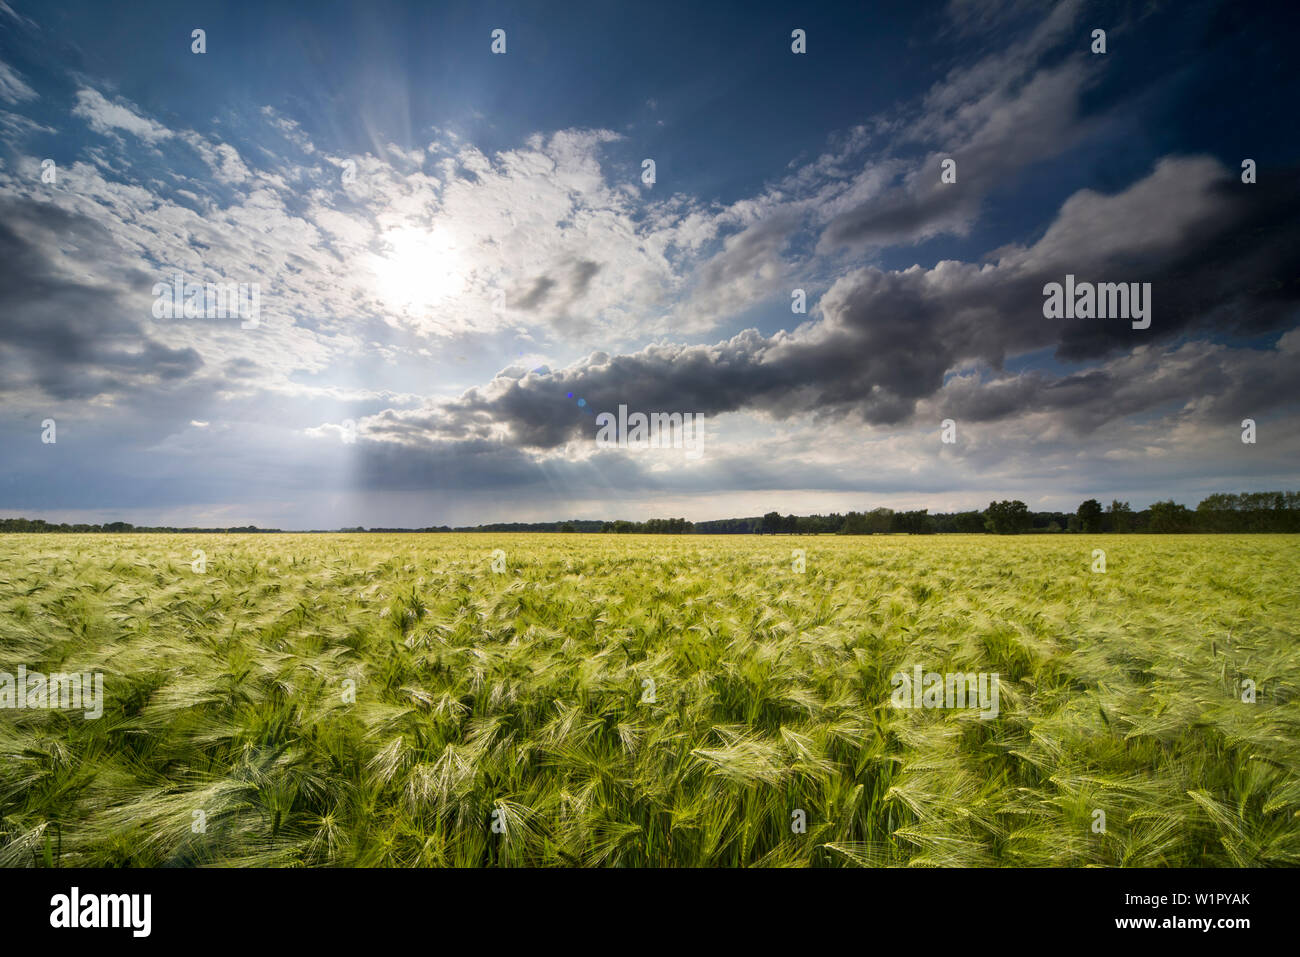 Barley field in the evening light, Goldenstedt, Vechta, Wildeshauser Geest, Lower Saxony, Germany Stock Photo